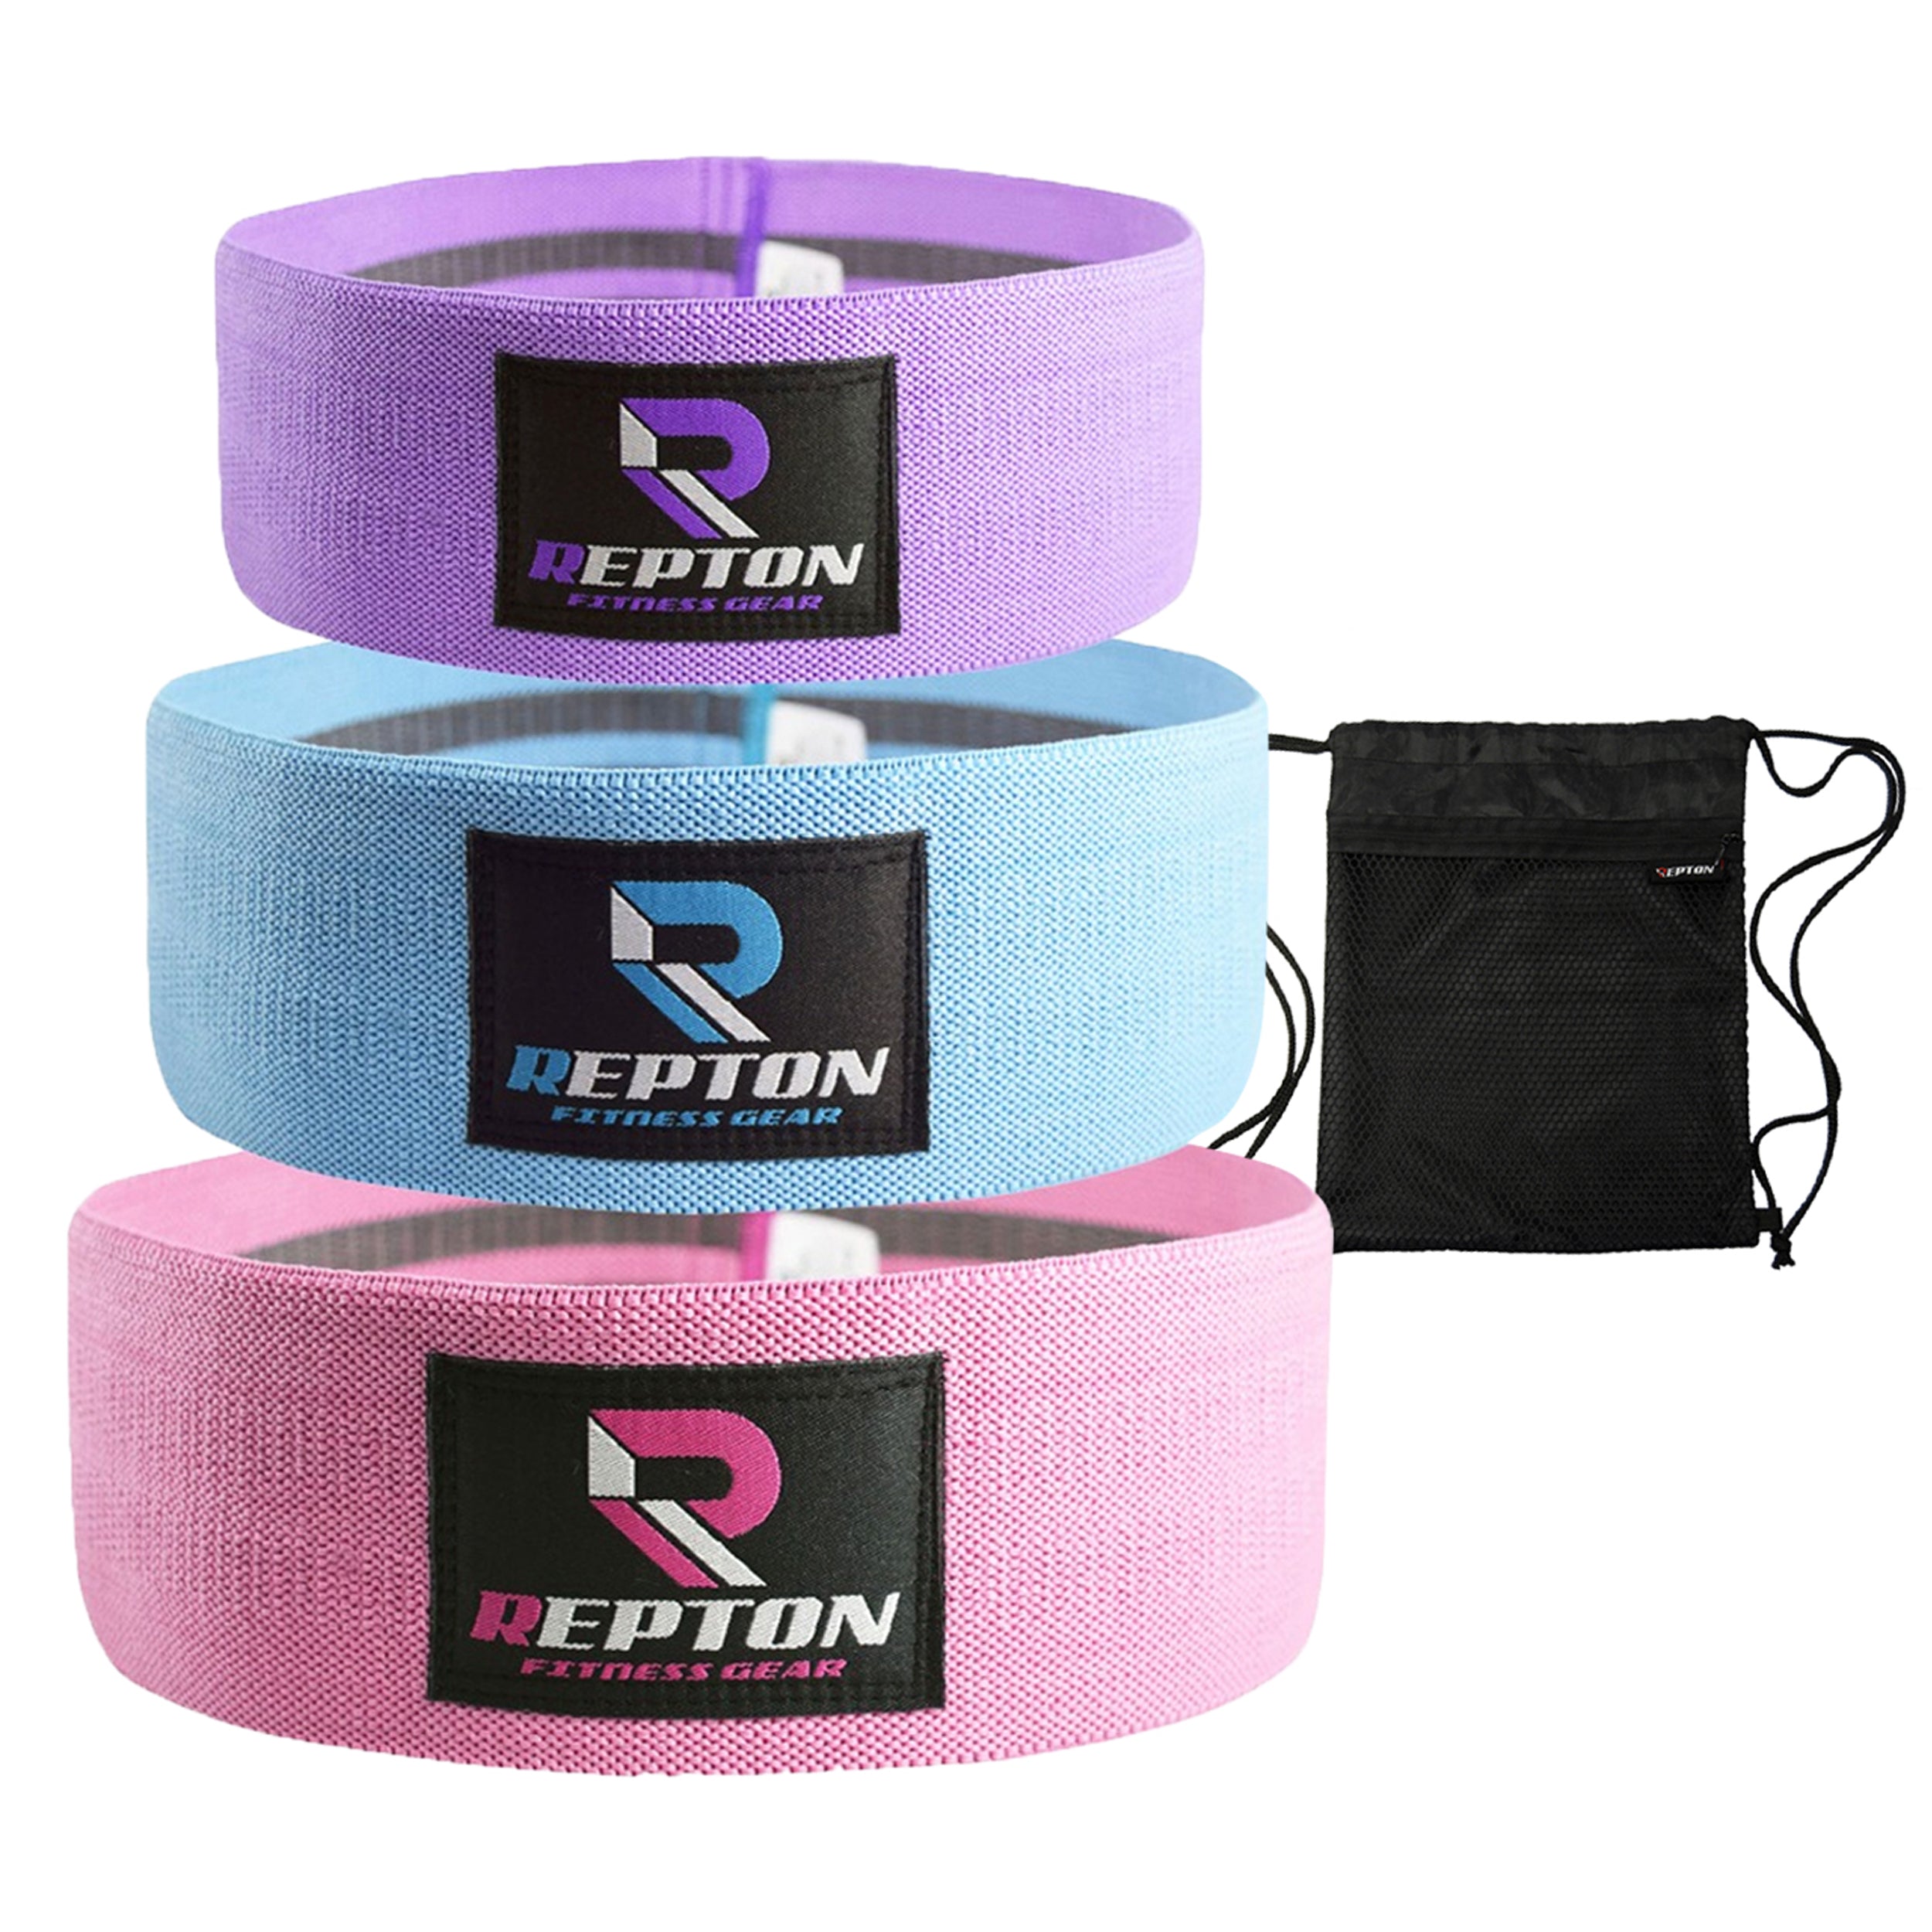 Gymbee Resistance Bands for Working Out, 3 (Black, Grey, Pink) - Bands for  Glutes, Thighs, Legs - Non-Slip Cloth Booty Bands, Workout Bands Resistance  for Women & Men - Home Fitness, Yoga